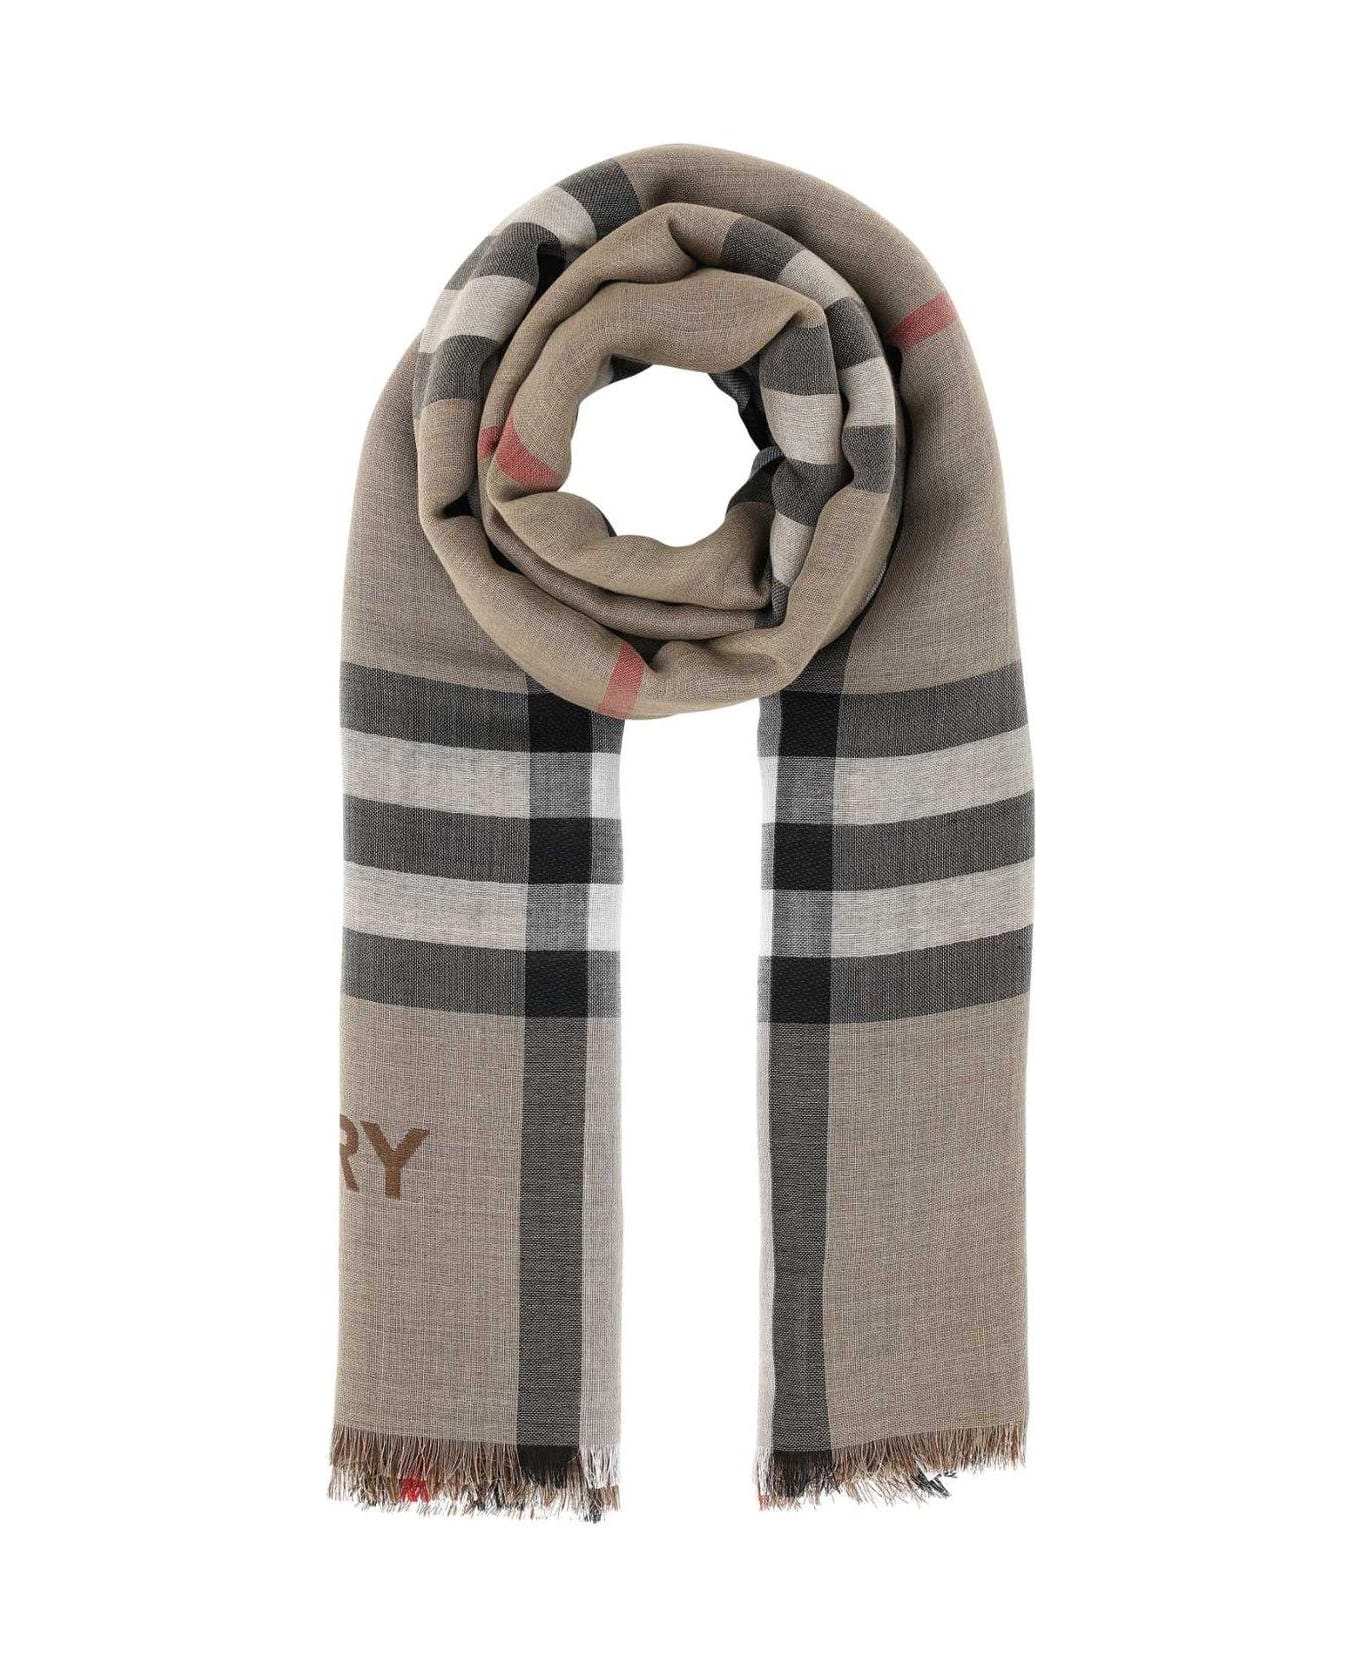 Burberry Frayed Edge Checked Scarf - Archive beige